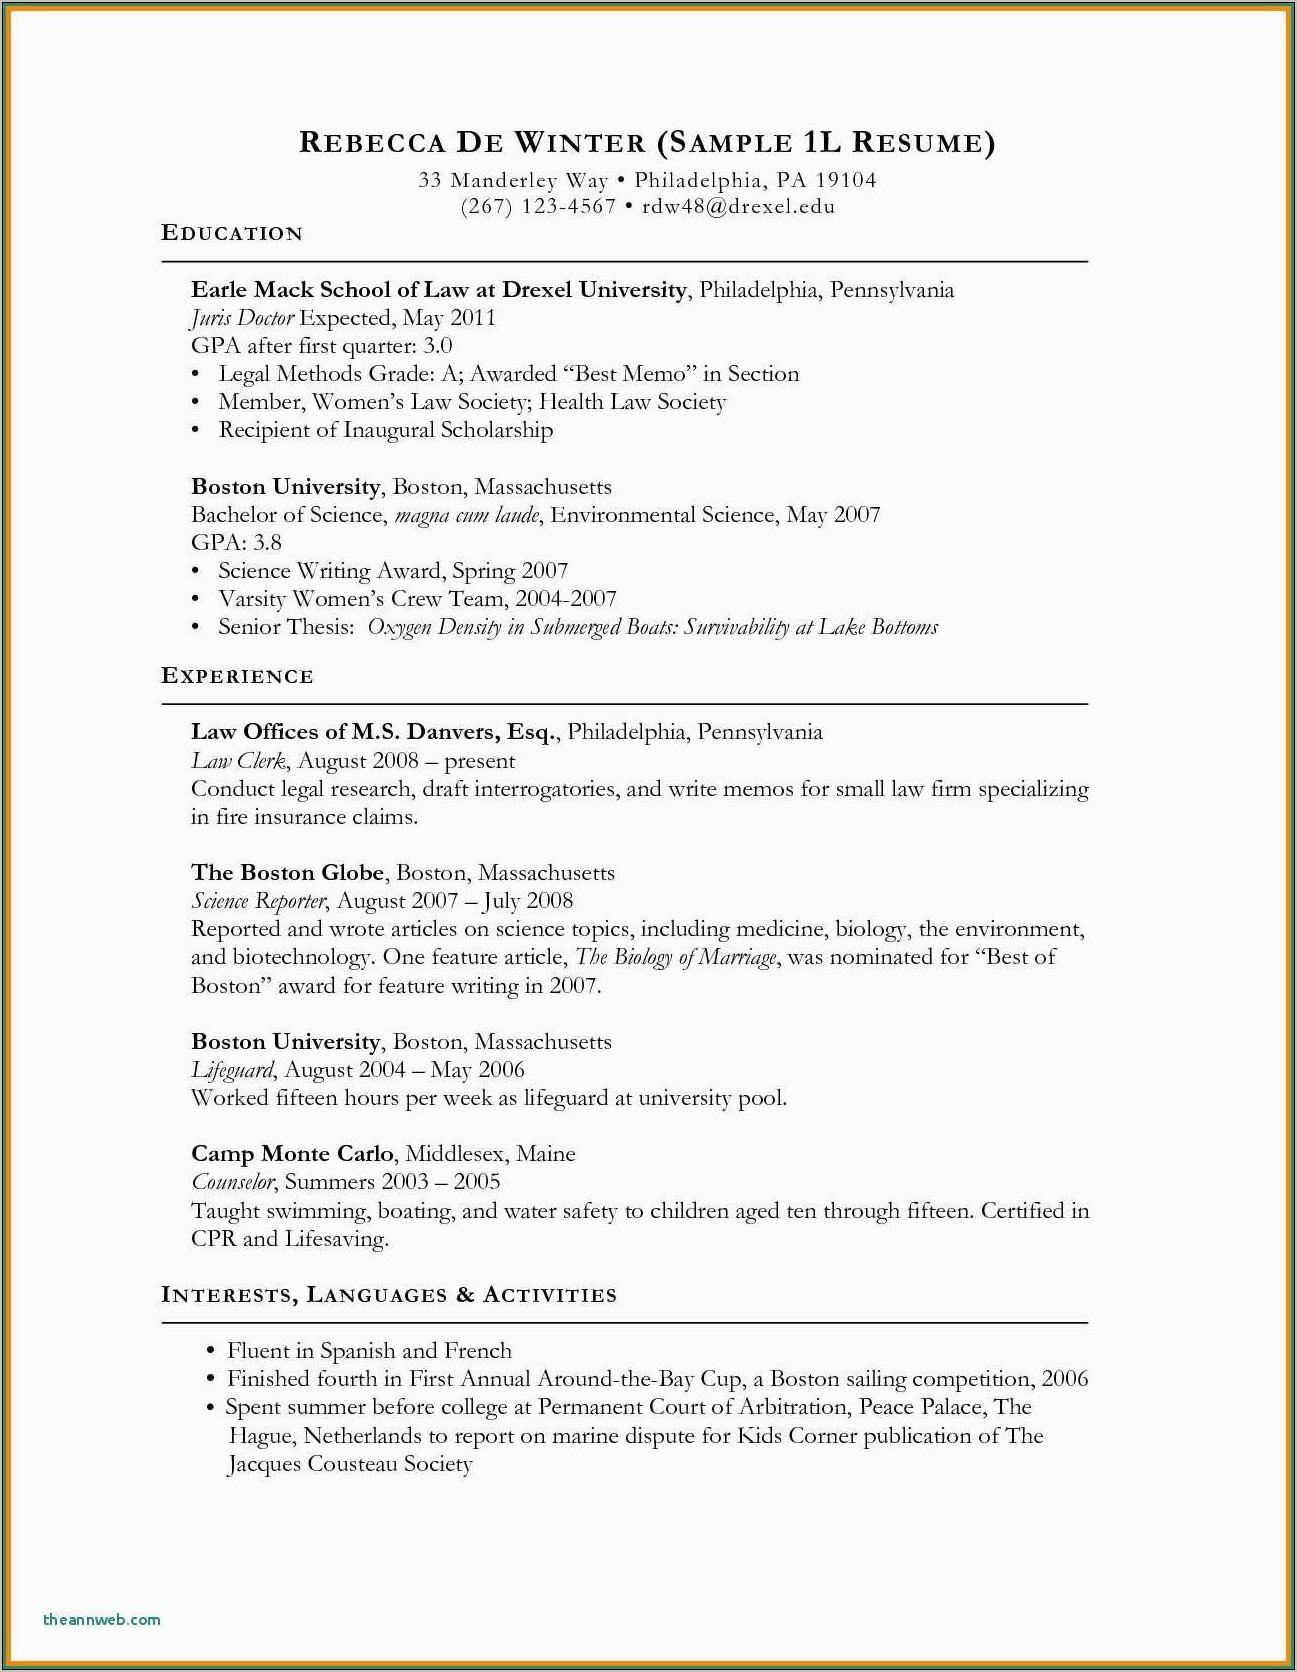 Resume Format For Law School Application